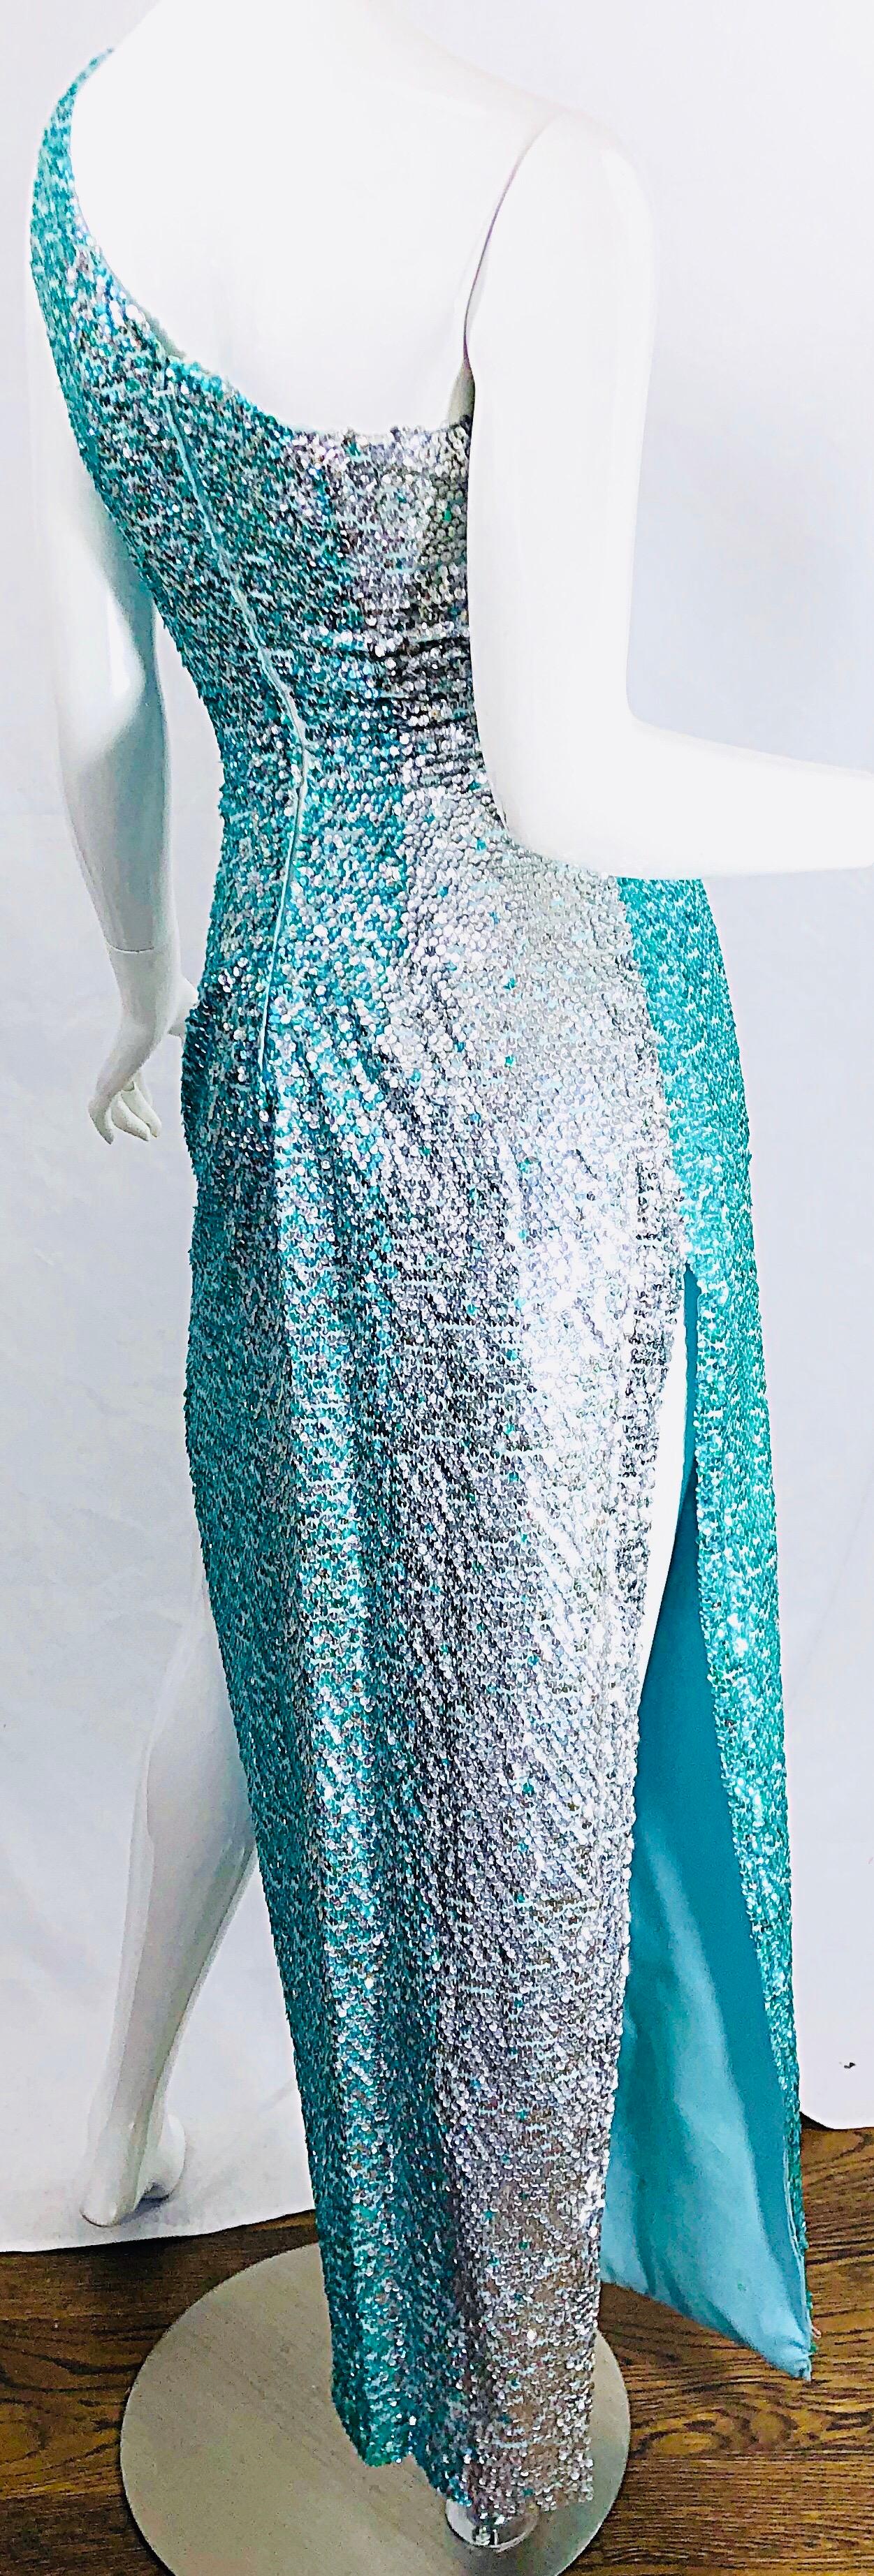 1970s Fully Sequined One Shoulder Sexy Ombre Aqua Silver Vintage 70s Gown Dress For Sale 5